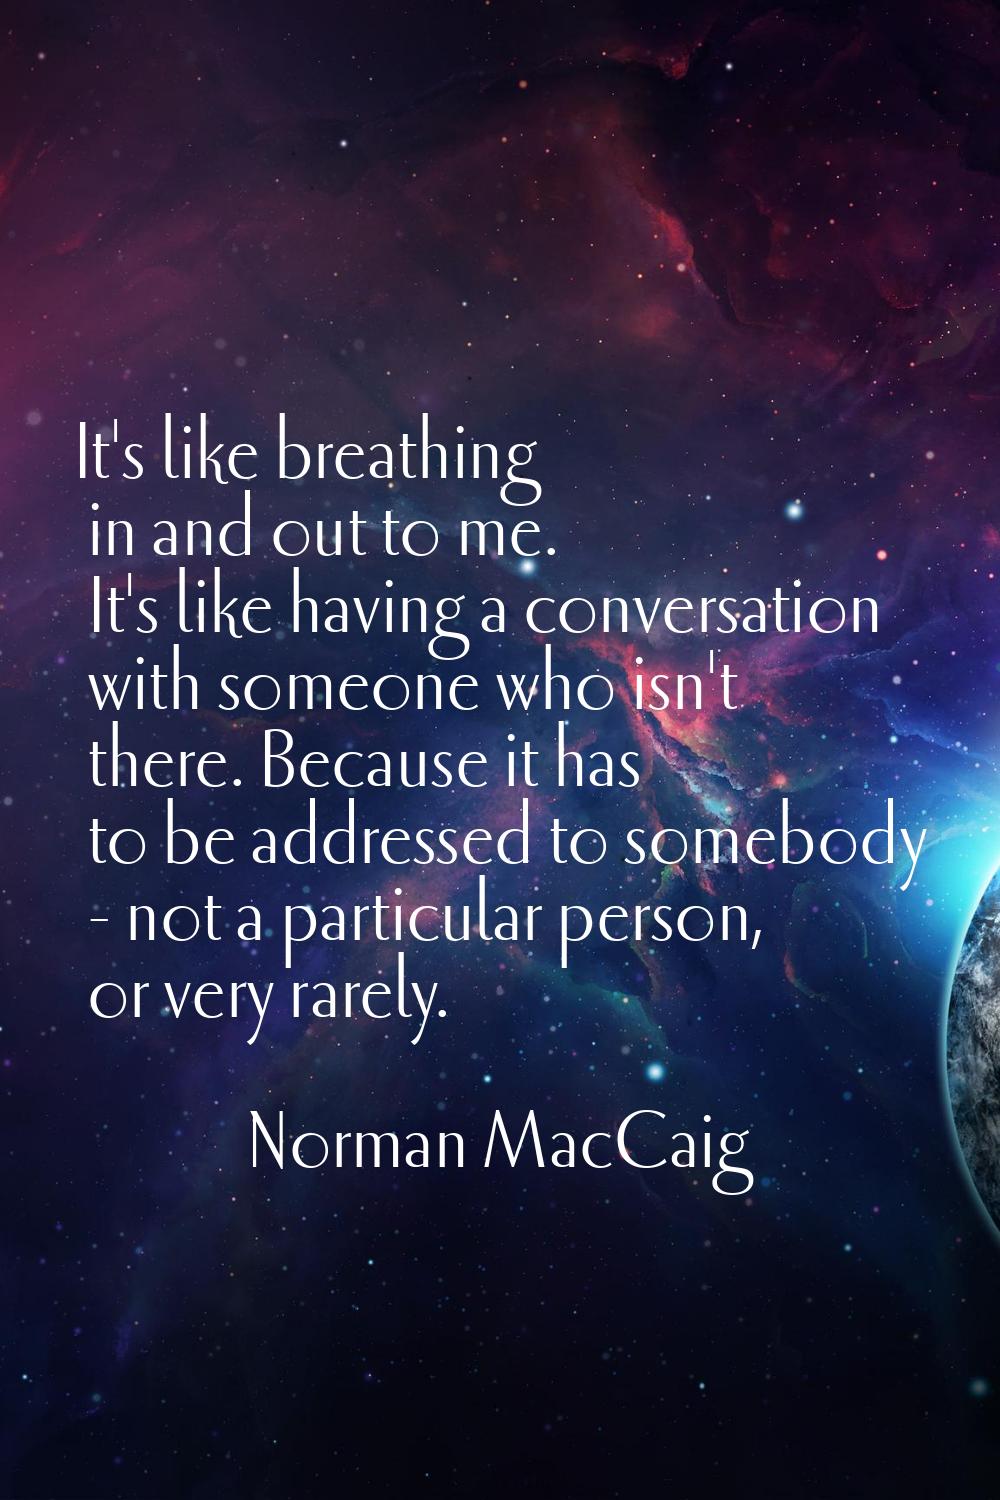 It's like breathing in and out to me. It's like having a conversation with someone who isn't there.